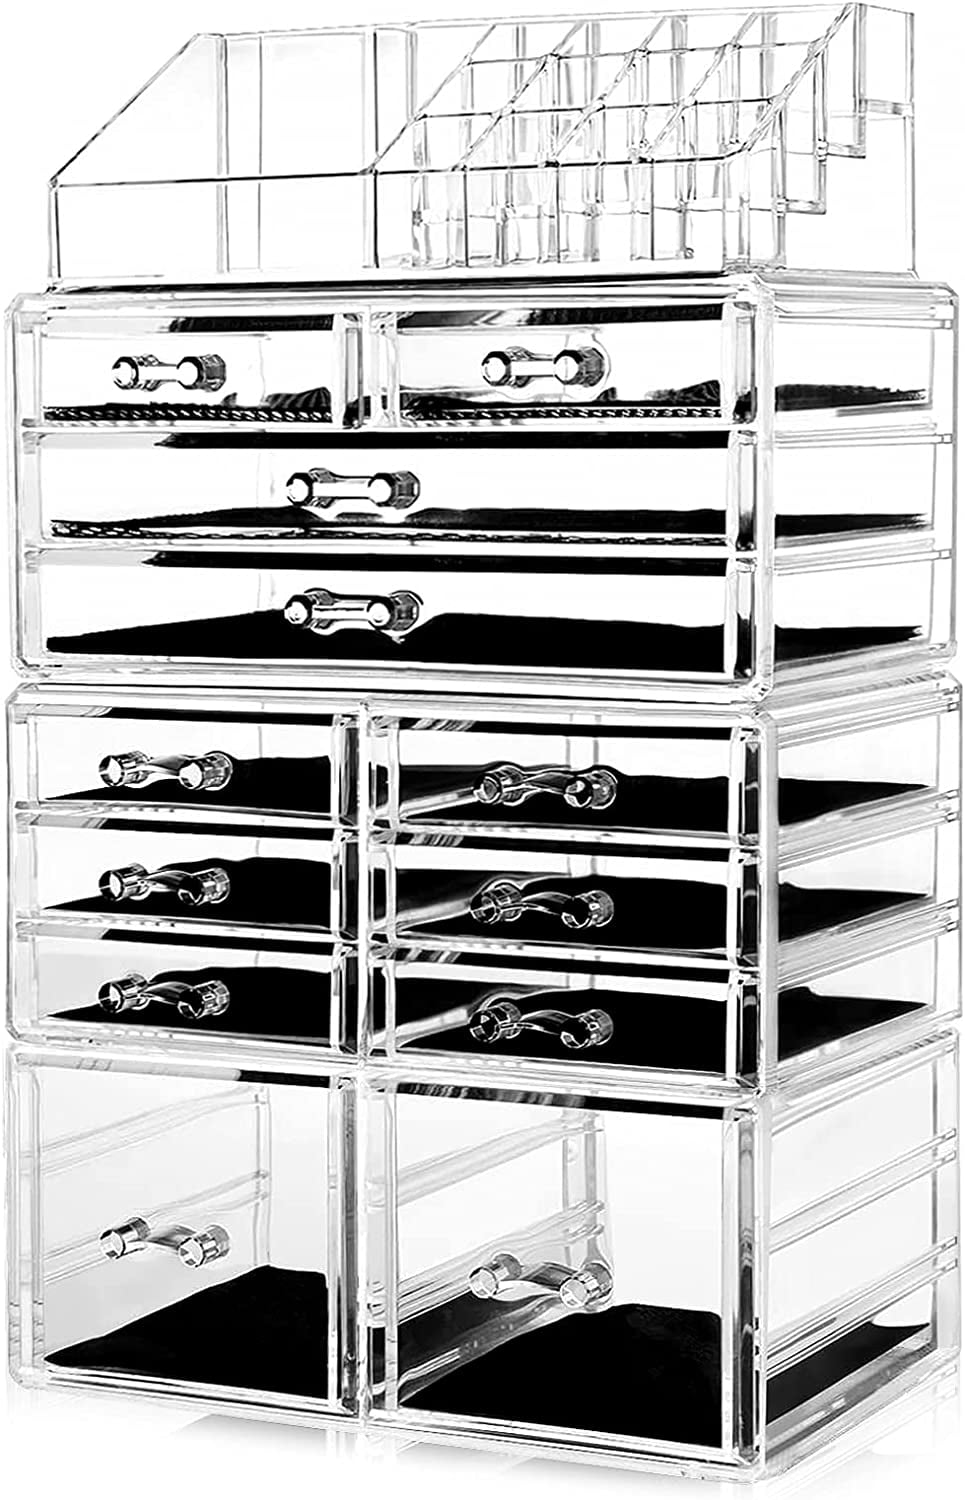  Cq acrylic Clear Cosmetics Organizer Stackable Makeup Storage  Drawers,2 Drawers for The Home Edit Containers For Jewelry Hair Accessories  Nail Polish Lipstick Make up Marker Pen : Beauty & Personal Care